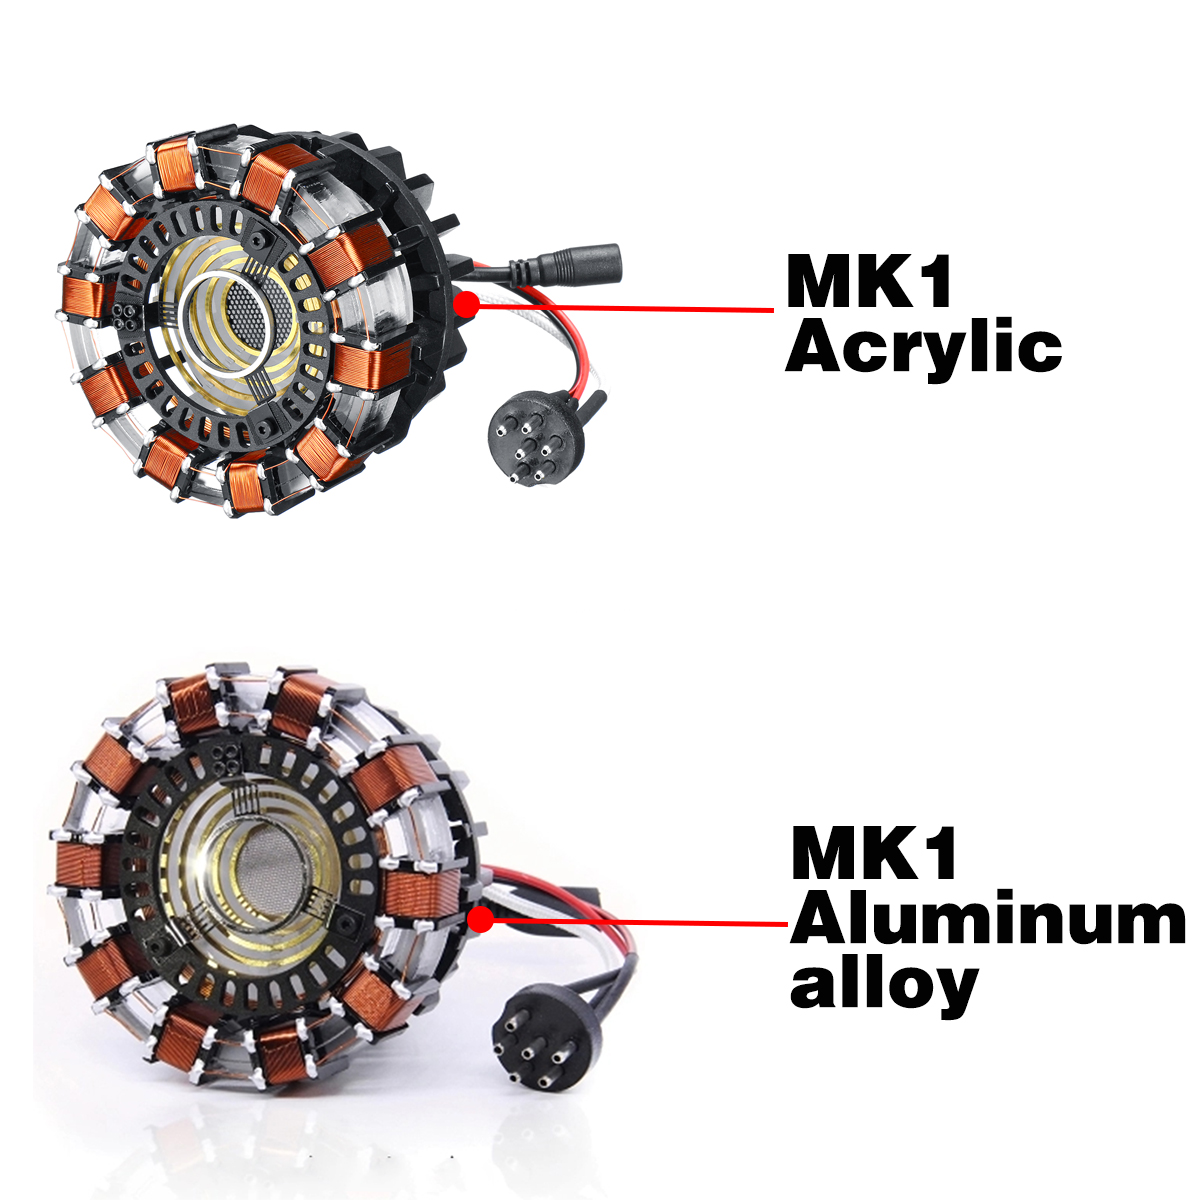 MK1 Aluminum Alloy Tony 1:1 Arc Reactor DIY Model Kit LED Chest Lamp USB Movie Props Gifts Science Toy 83